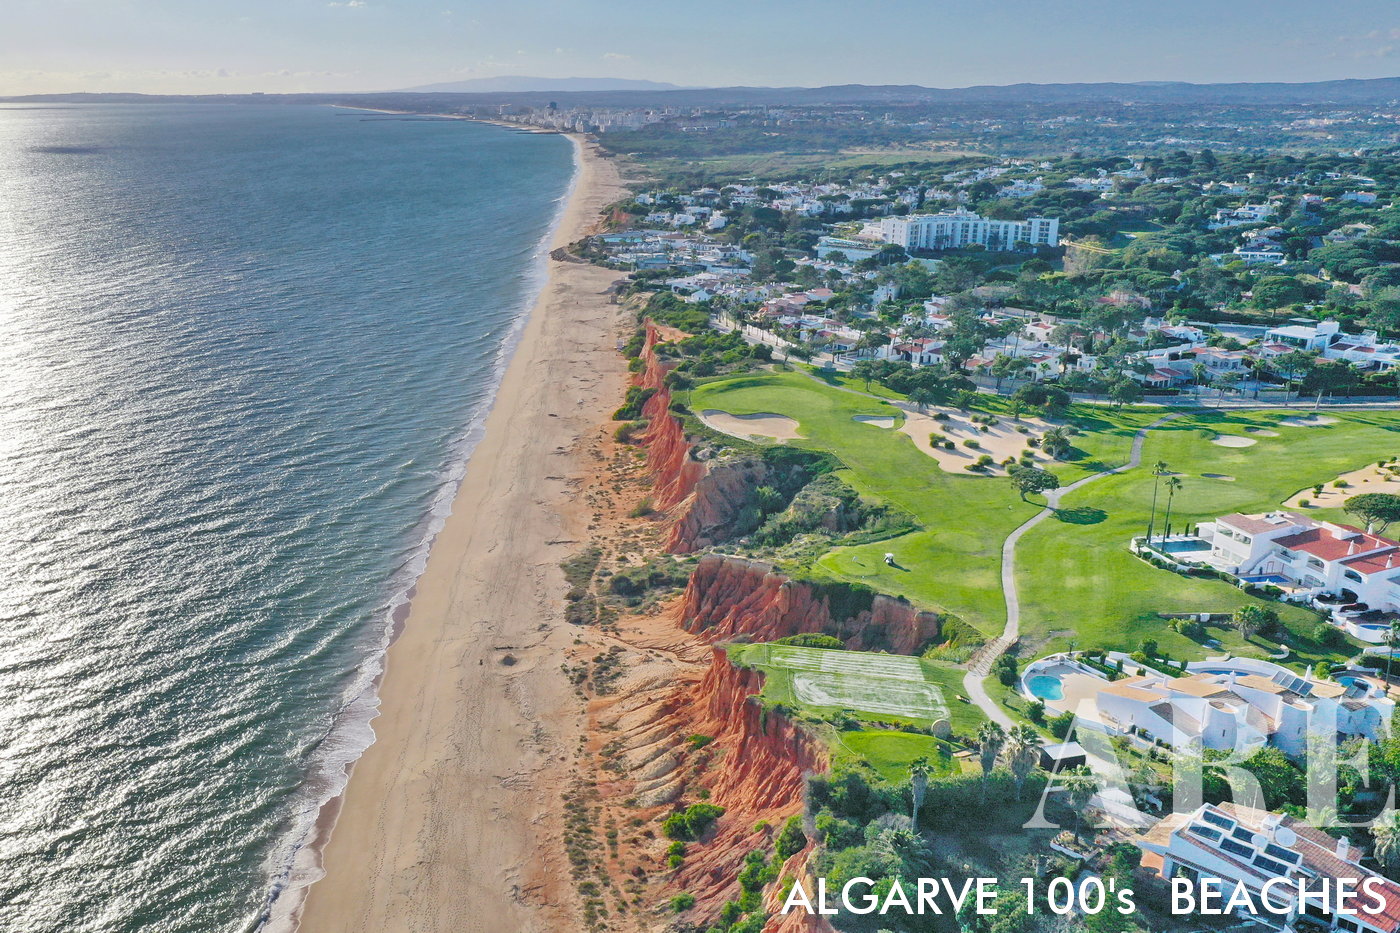 The view from Vale do Lobo beach towards the west encompasses the scenic stretch of coastline leading to the city of Quarteira and the Atlantic Ocean.